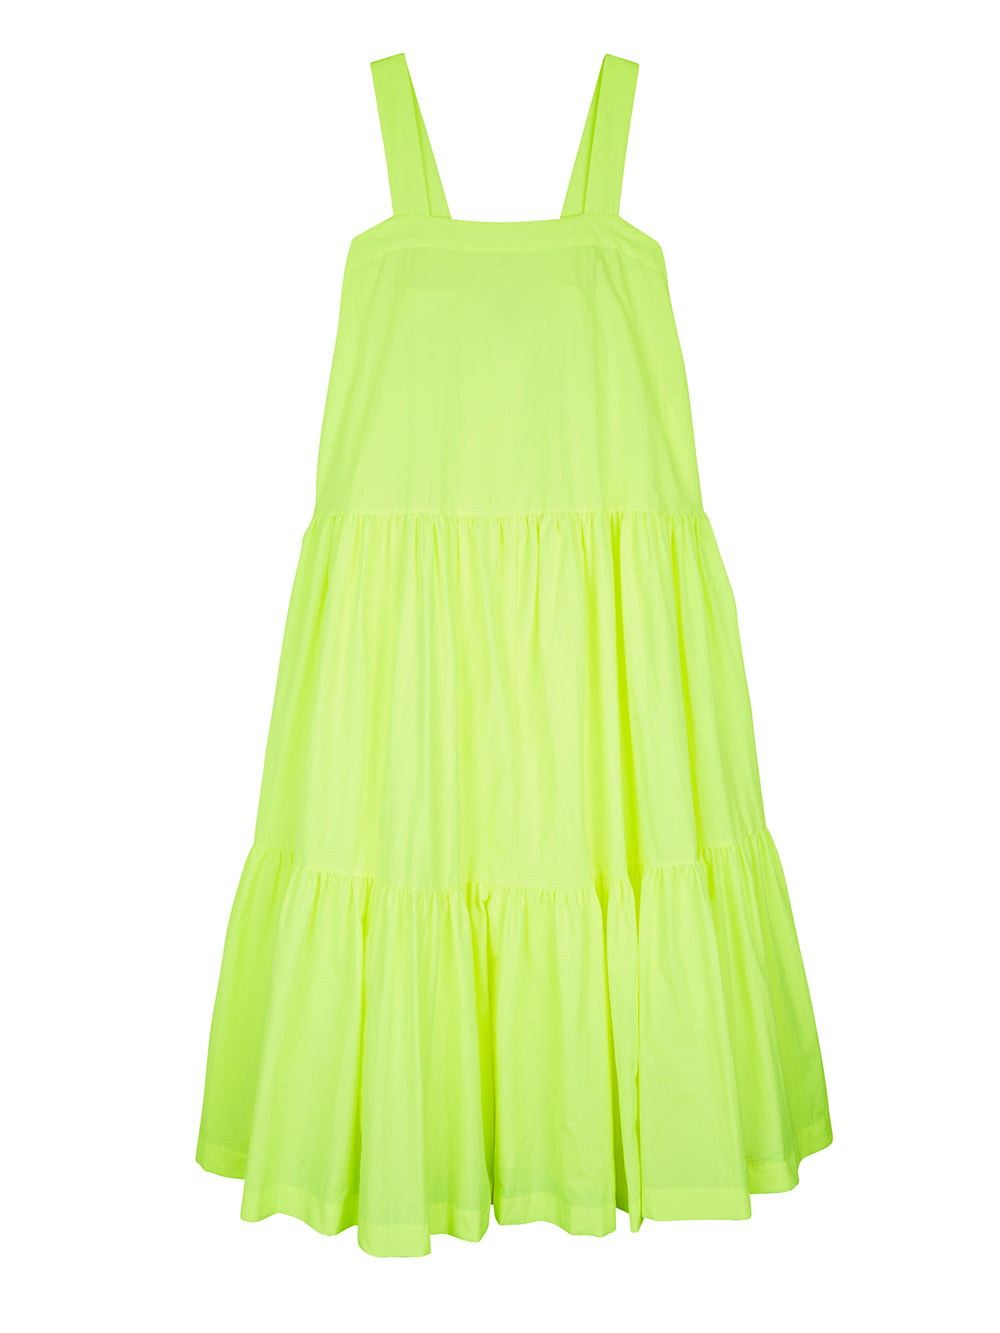 STRAPPY DRESS WITH NEON YELLOW FLOWERS